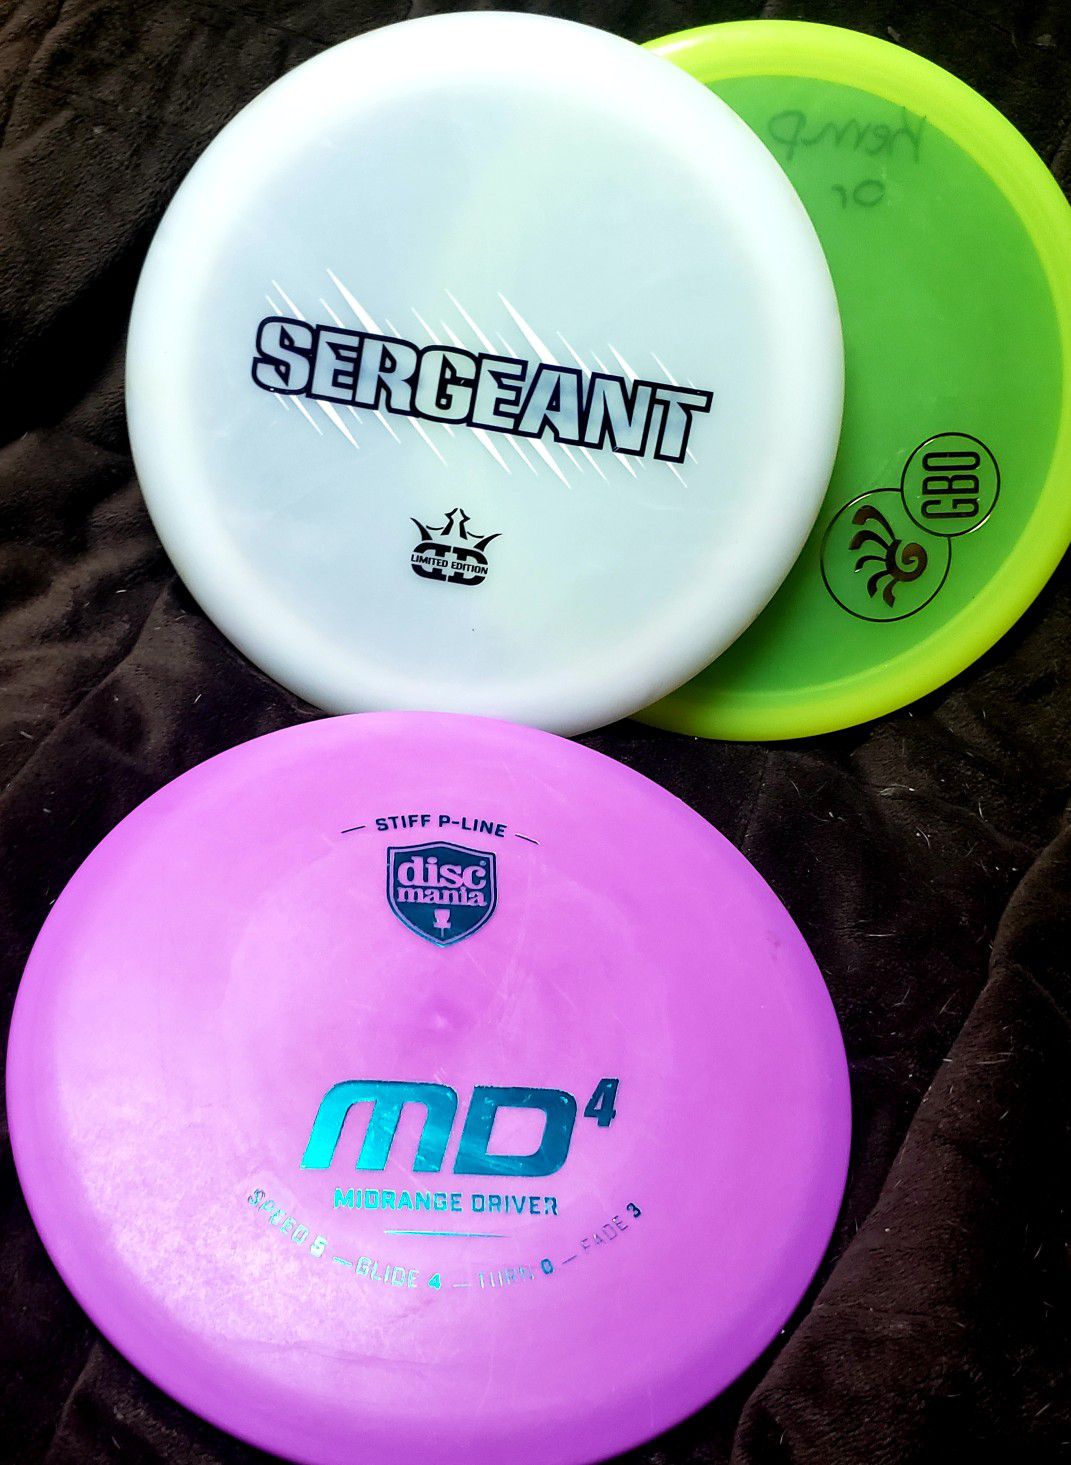 Disc Golfing Distance Driver's, Fairway Driver's, Mid-Range Driver's, and Putter's.. The ZEUS, DISCRAFT BUZZZ, CARNK are Sold.